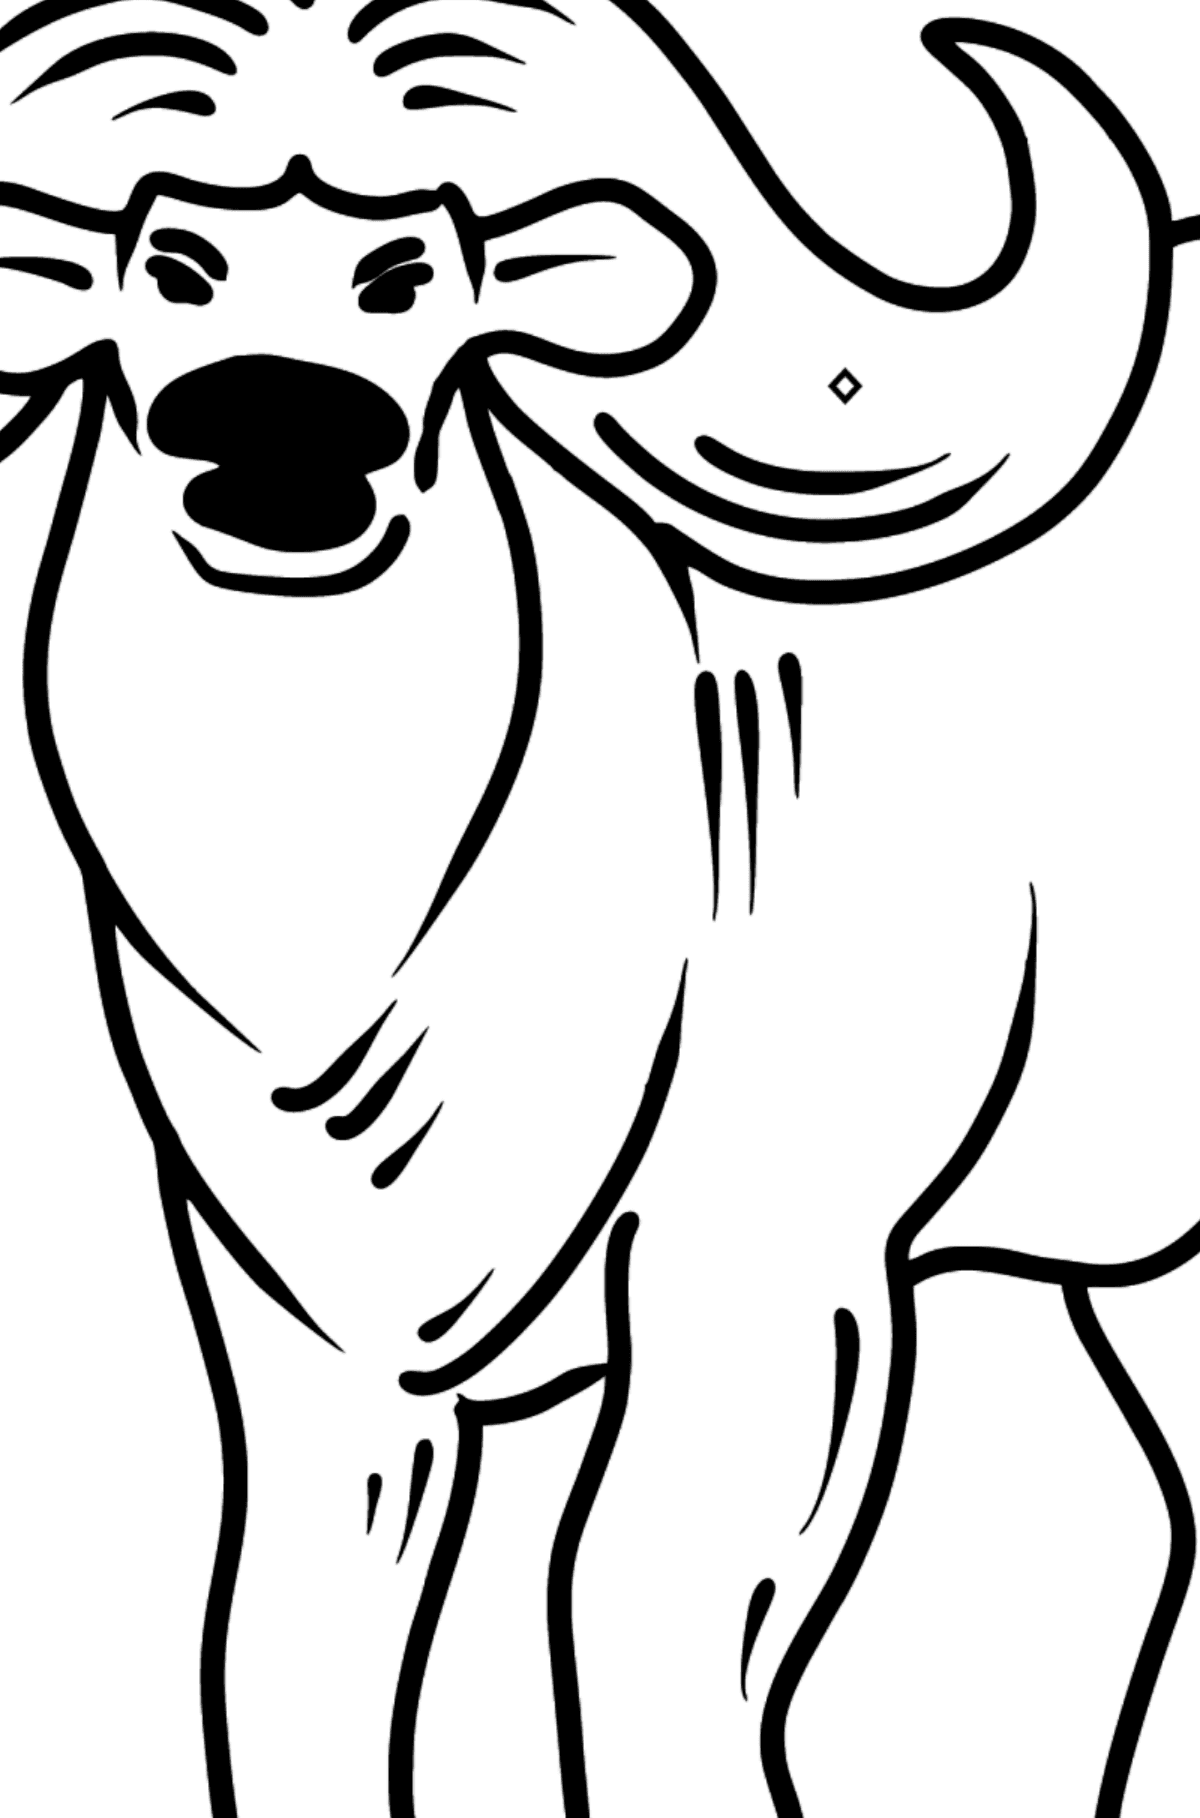 Buffalo coloring page - Coloring by Geometric Shapes for Kids